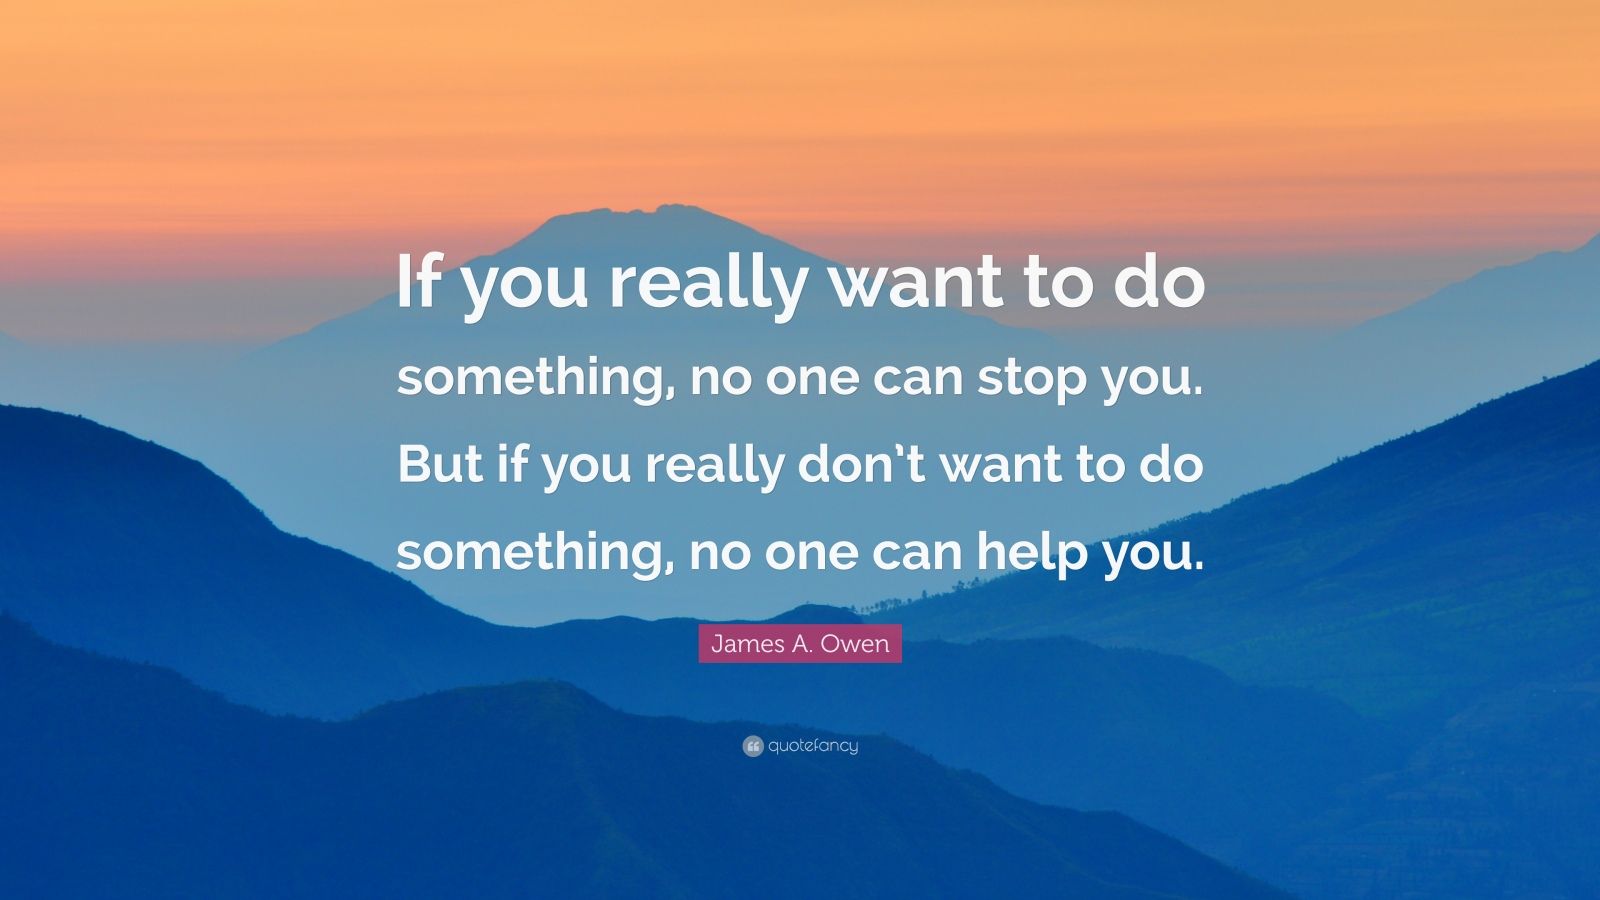 James A. Owen Quote: “If you really want to do something, no one can